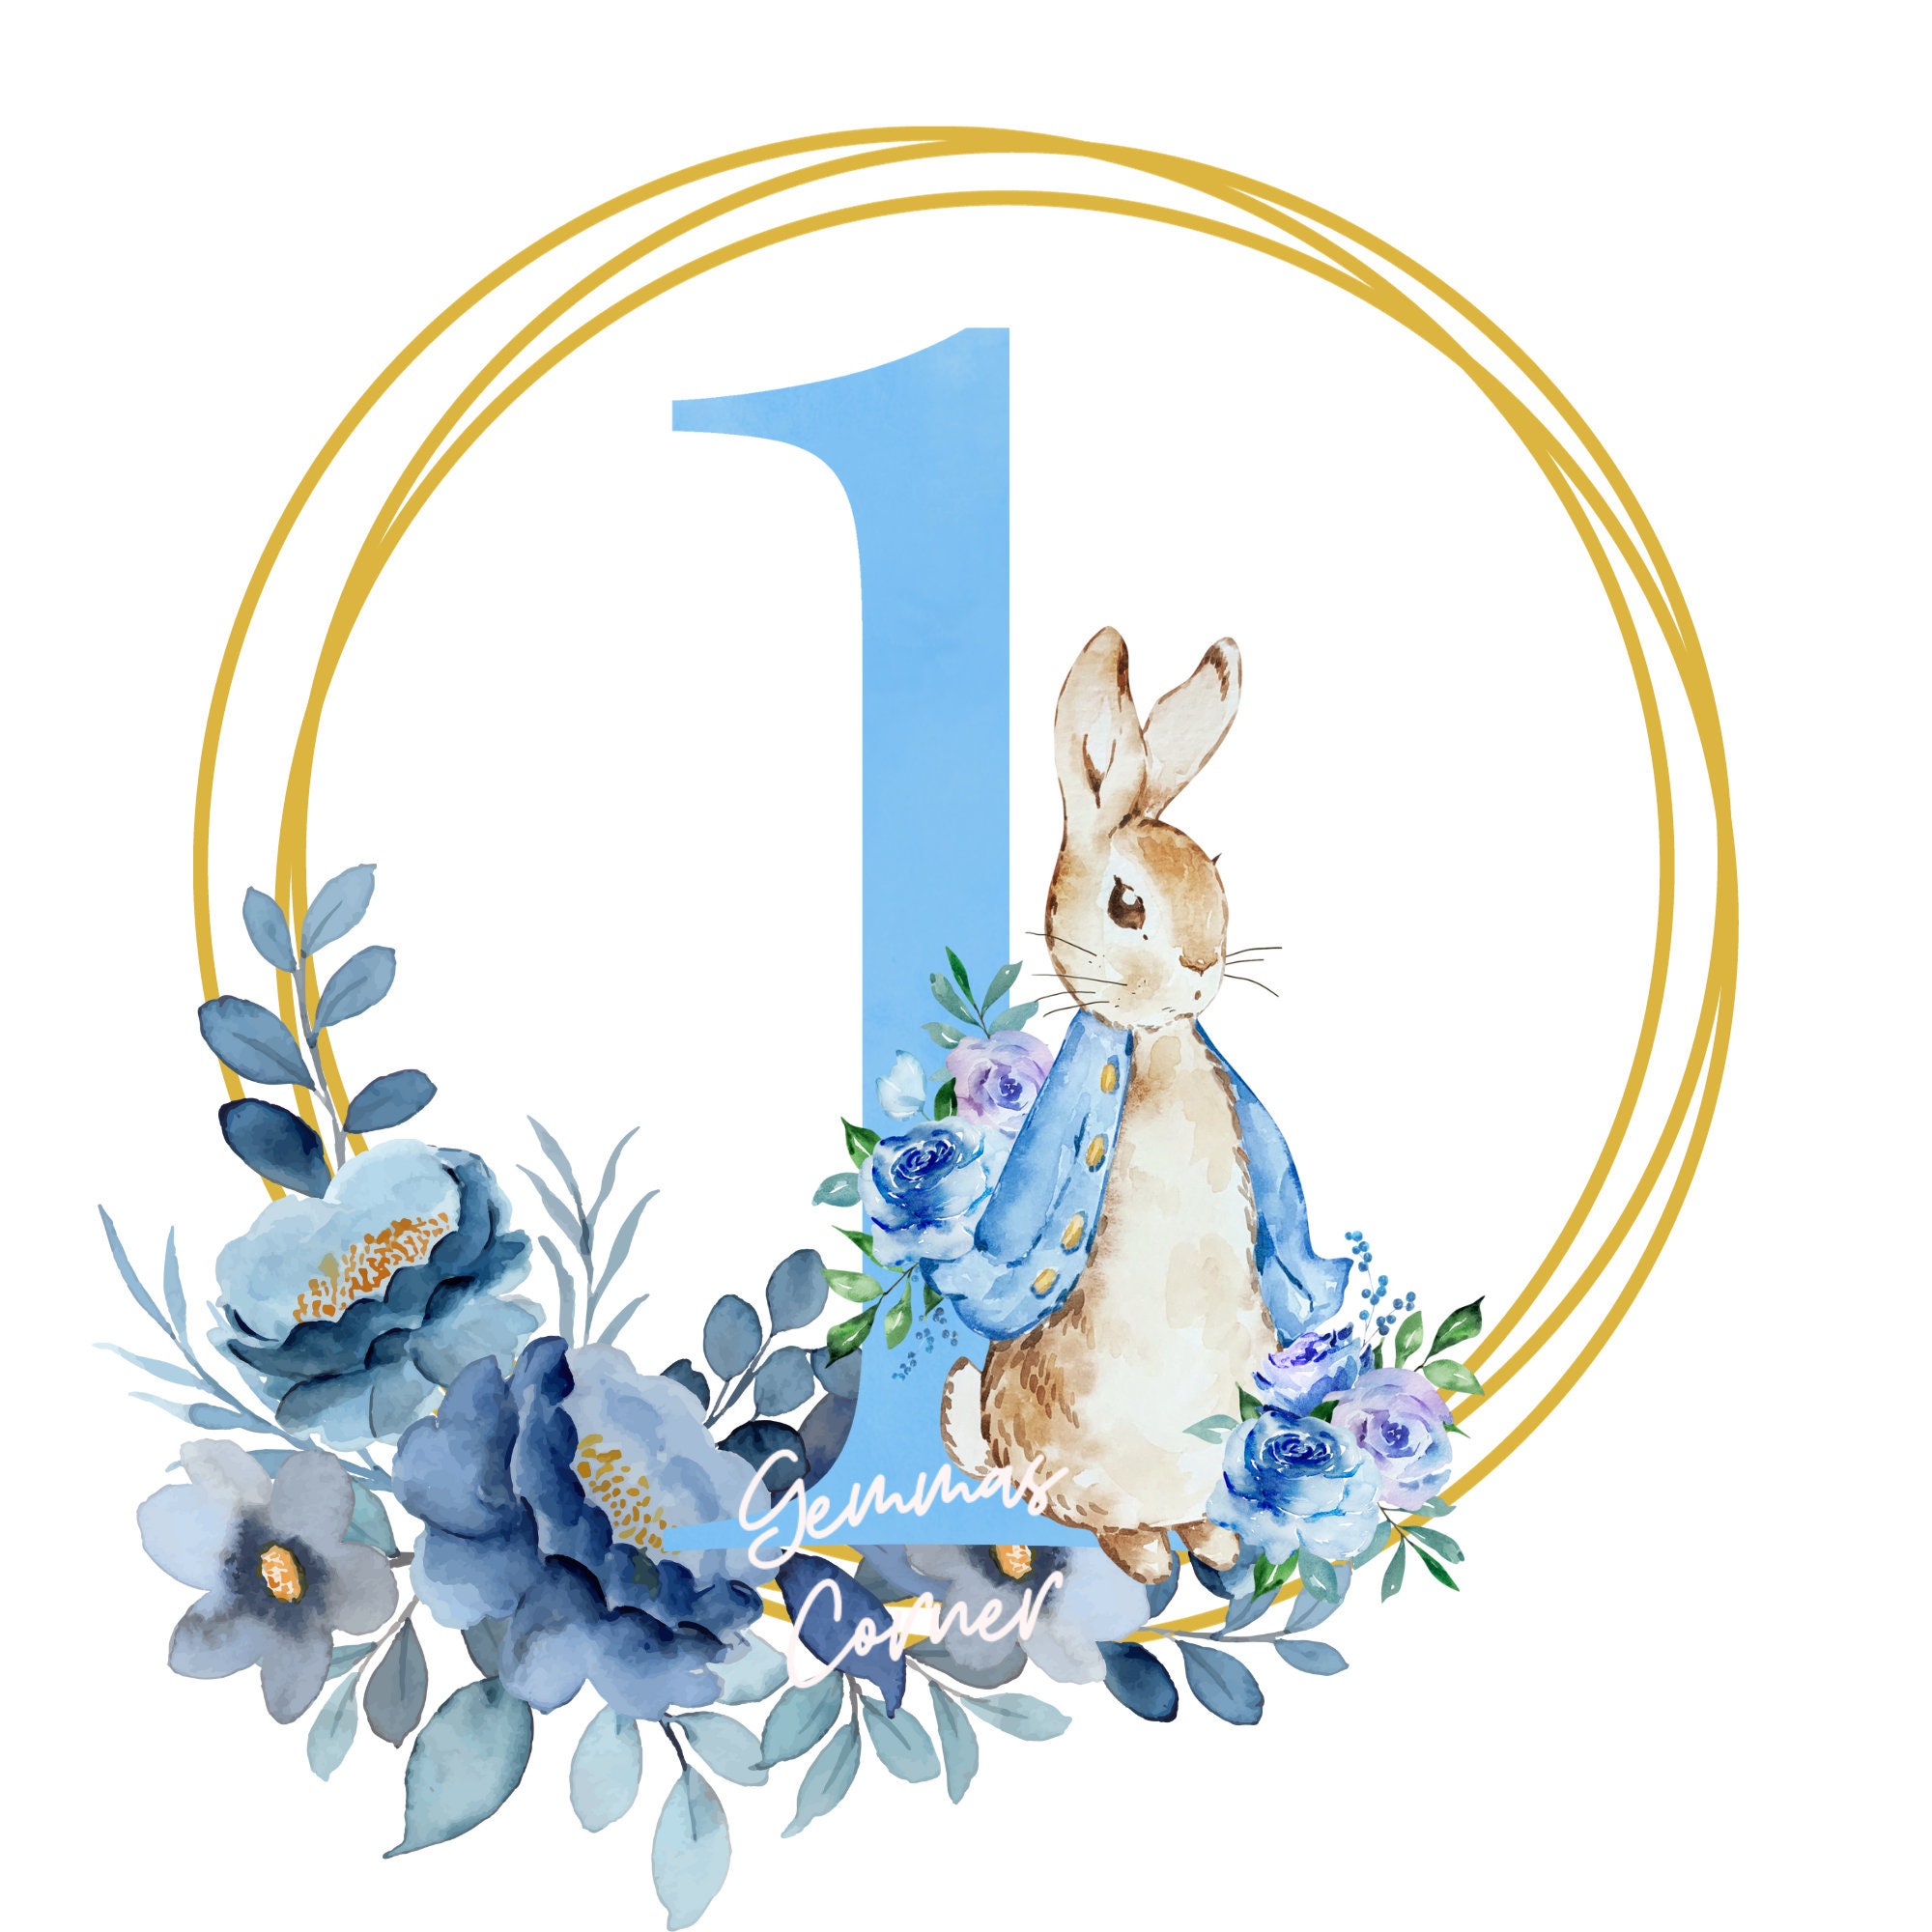 Peter the Rabbit PNG, Peter Rabbit Age 1 PNG, Instant Digital Download ...